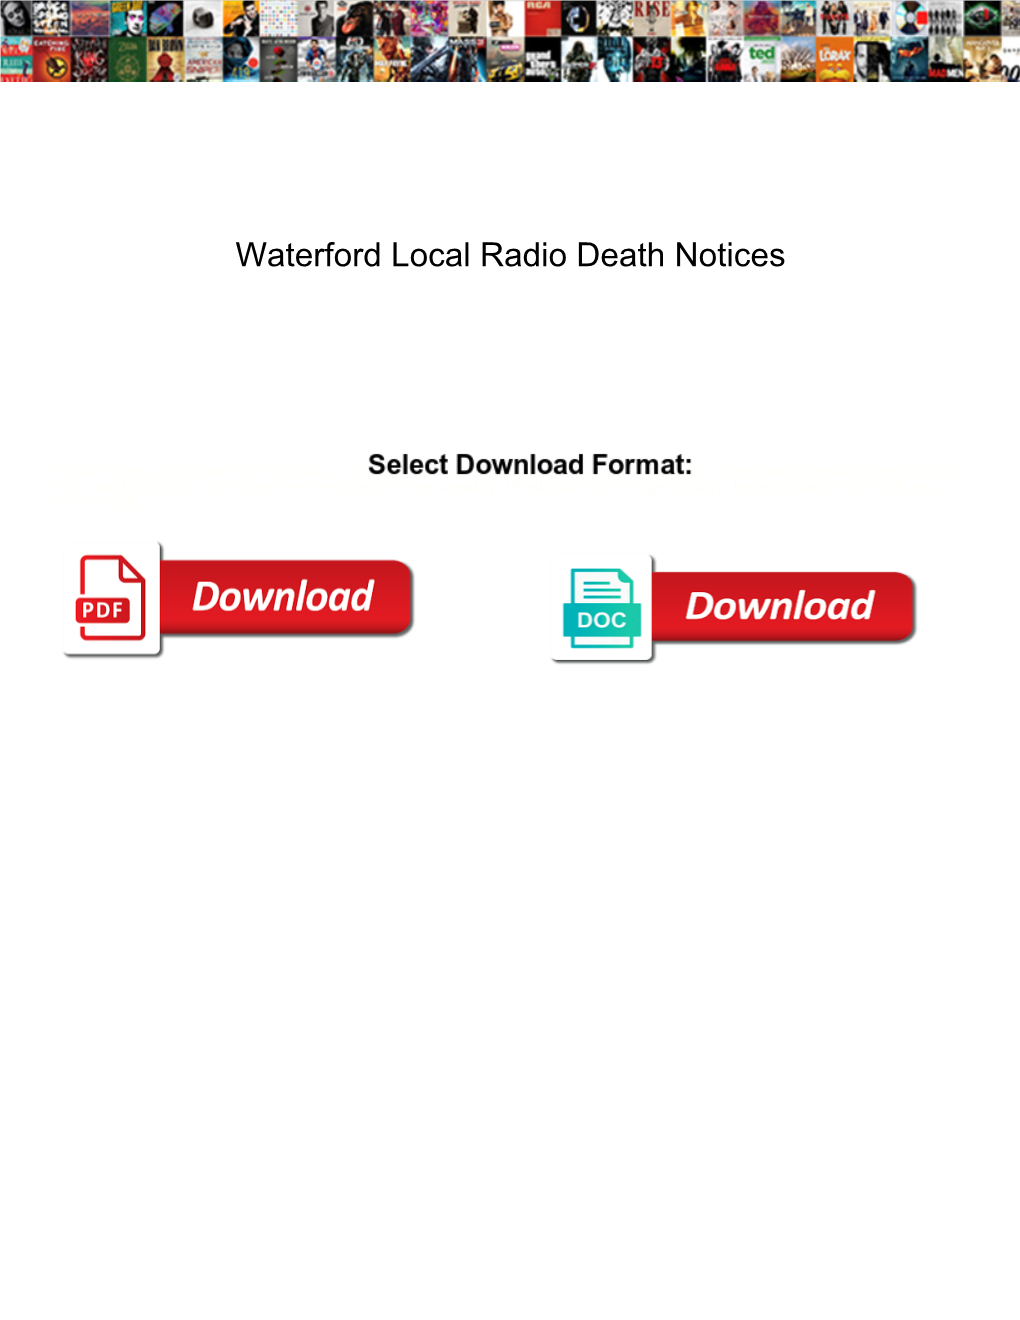 Waterford Local Radio Death Notices